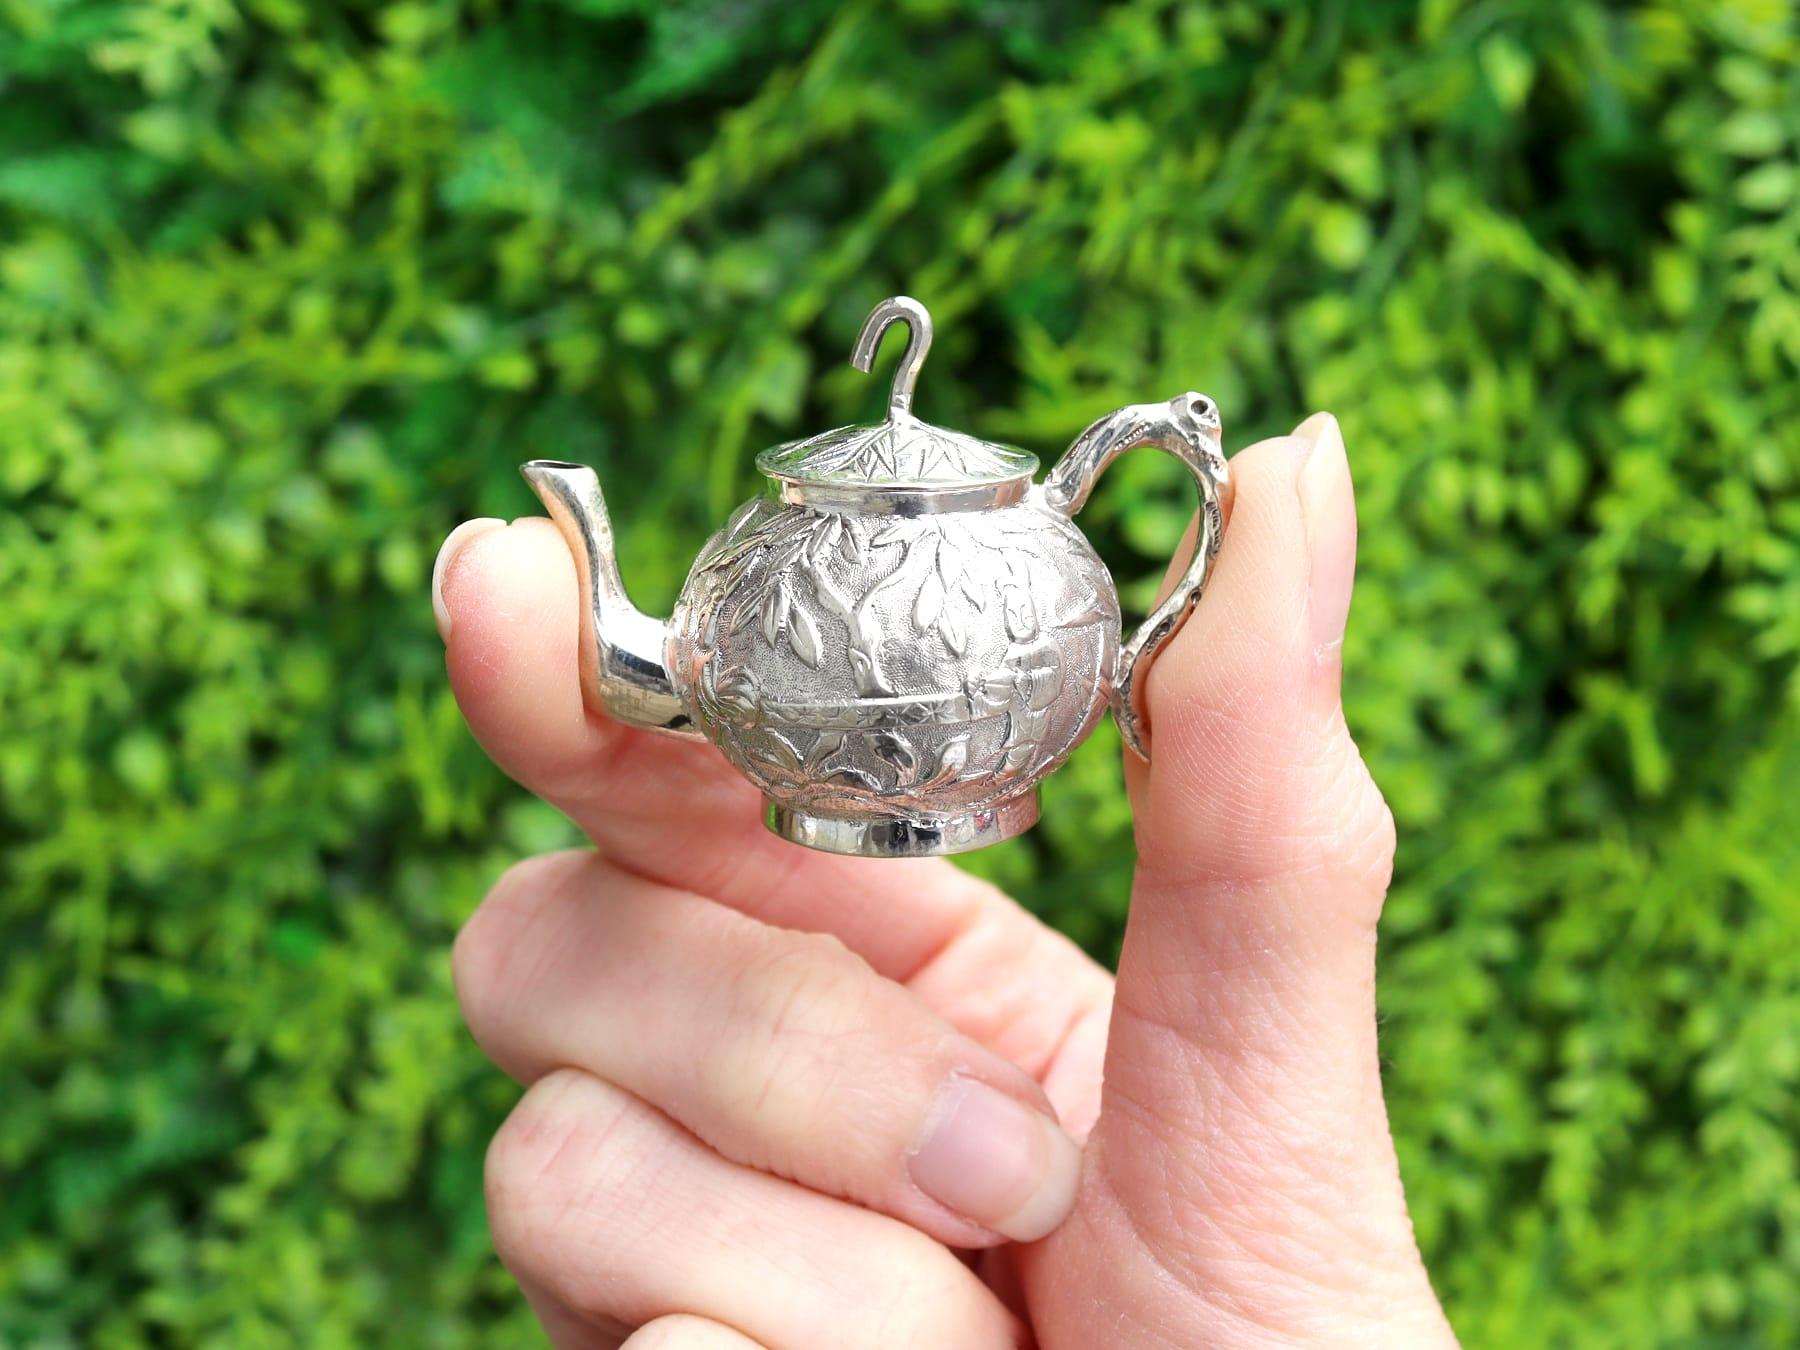 An exceptional, fine and impressive antique Chinese silver miniature three piece tea service; part of our novelty silver collection.

The exceptional antique Chinese silver miniature silver tea set consists of a teapot, cream jug and sugar